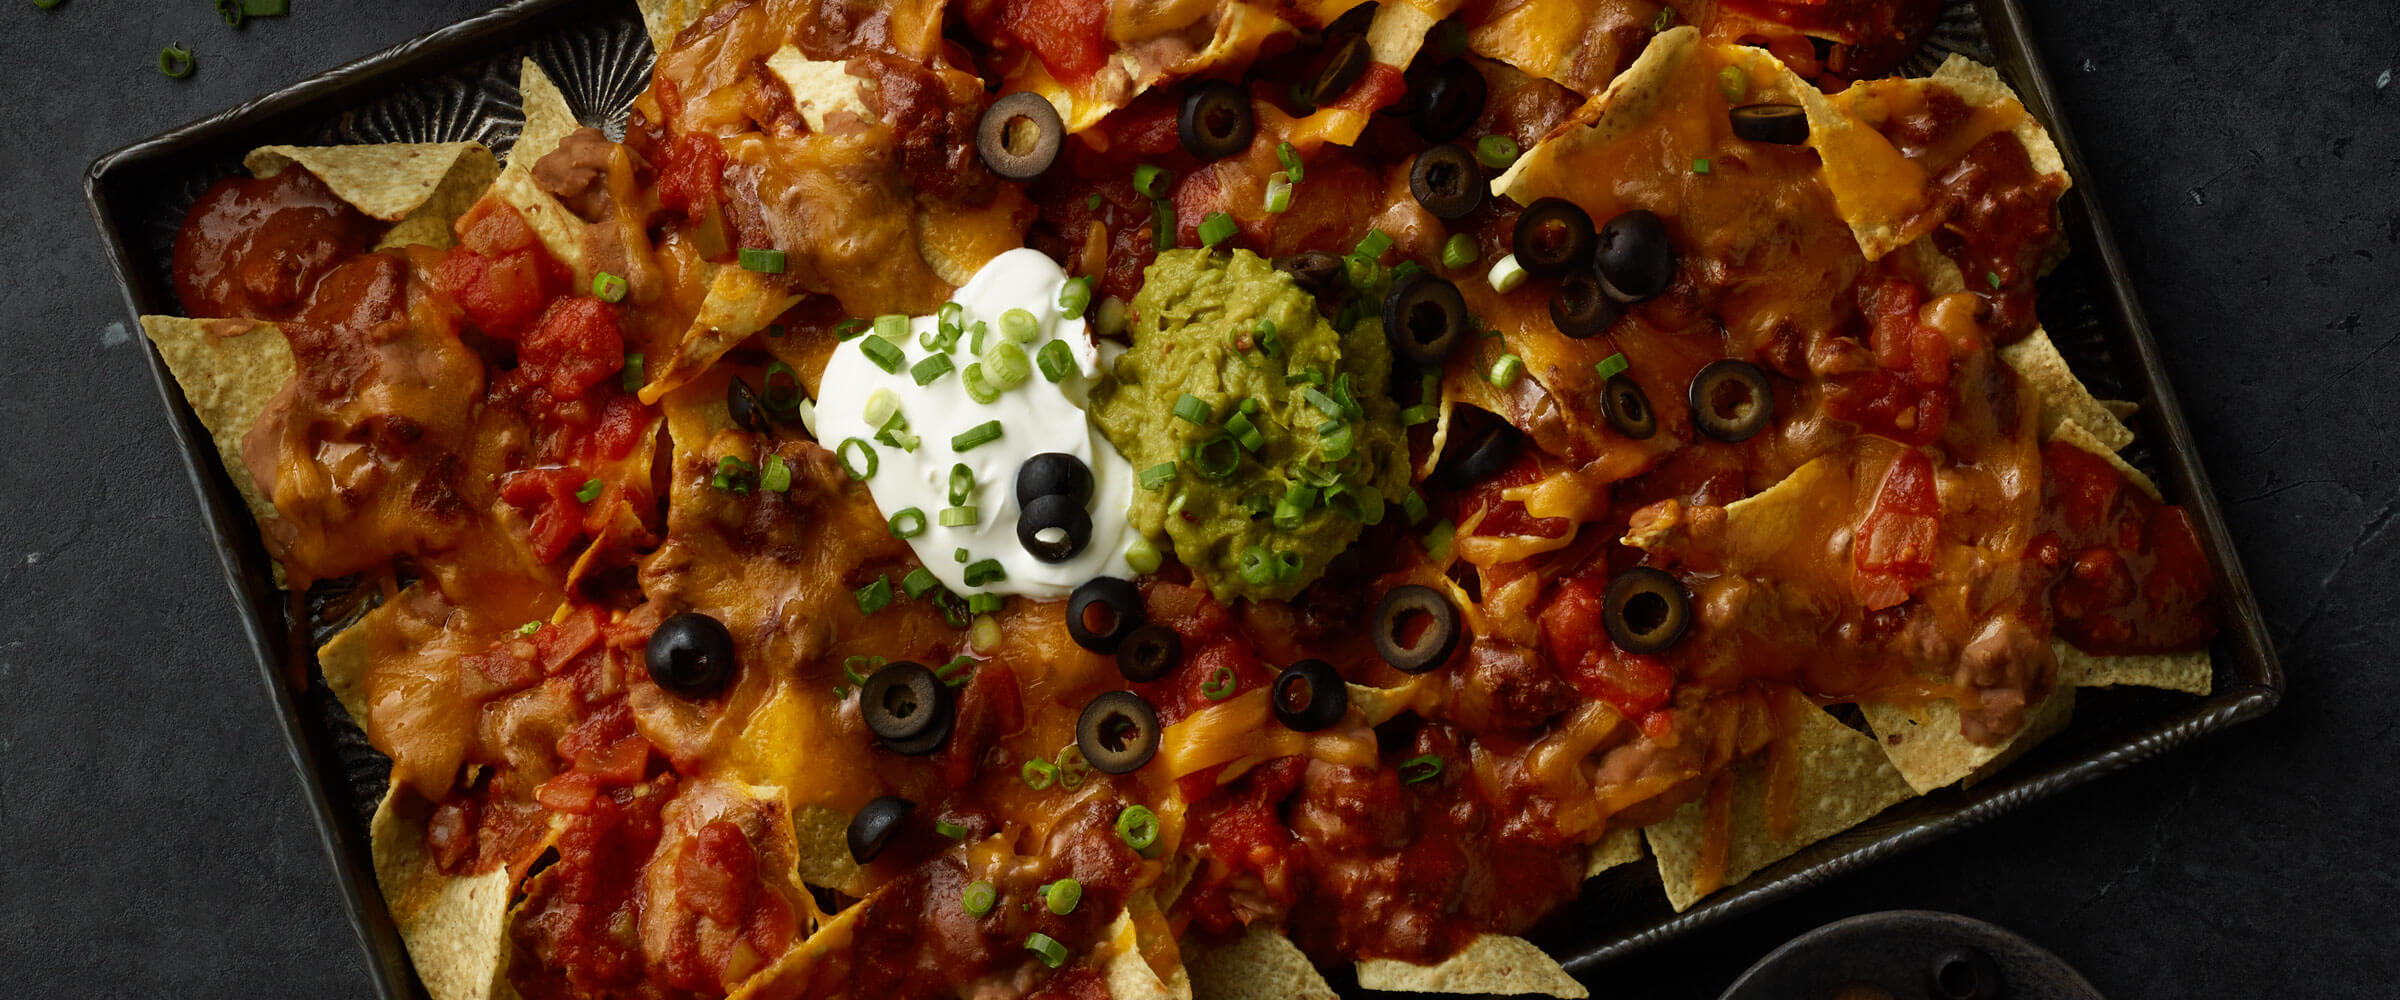 Ultimate Chili Nachos in black dish topped black olives, sour cream, chives and guacamole